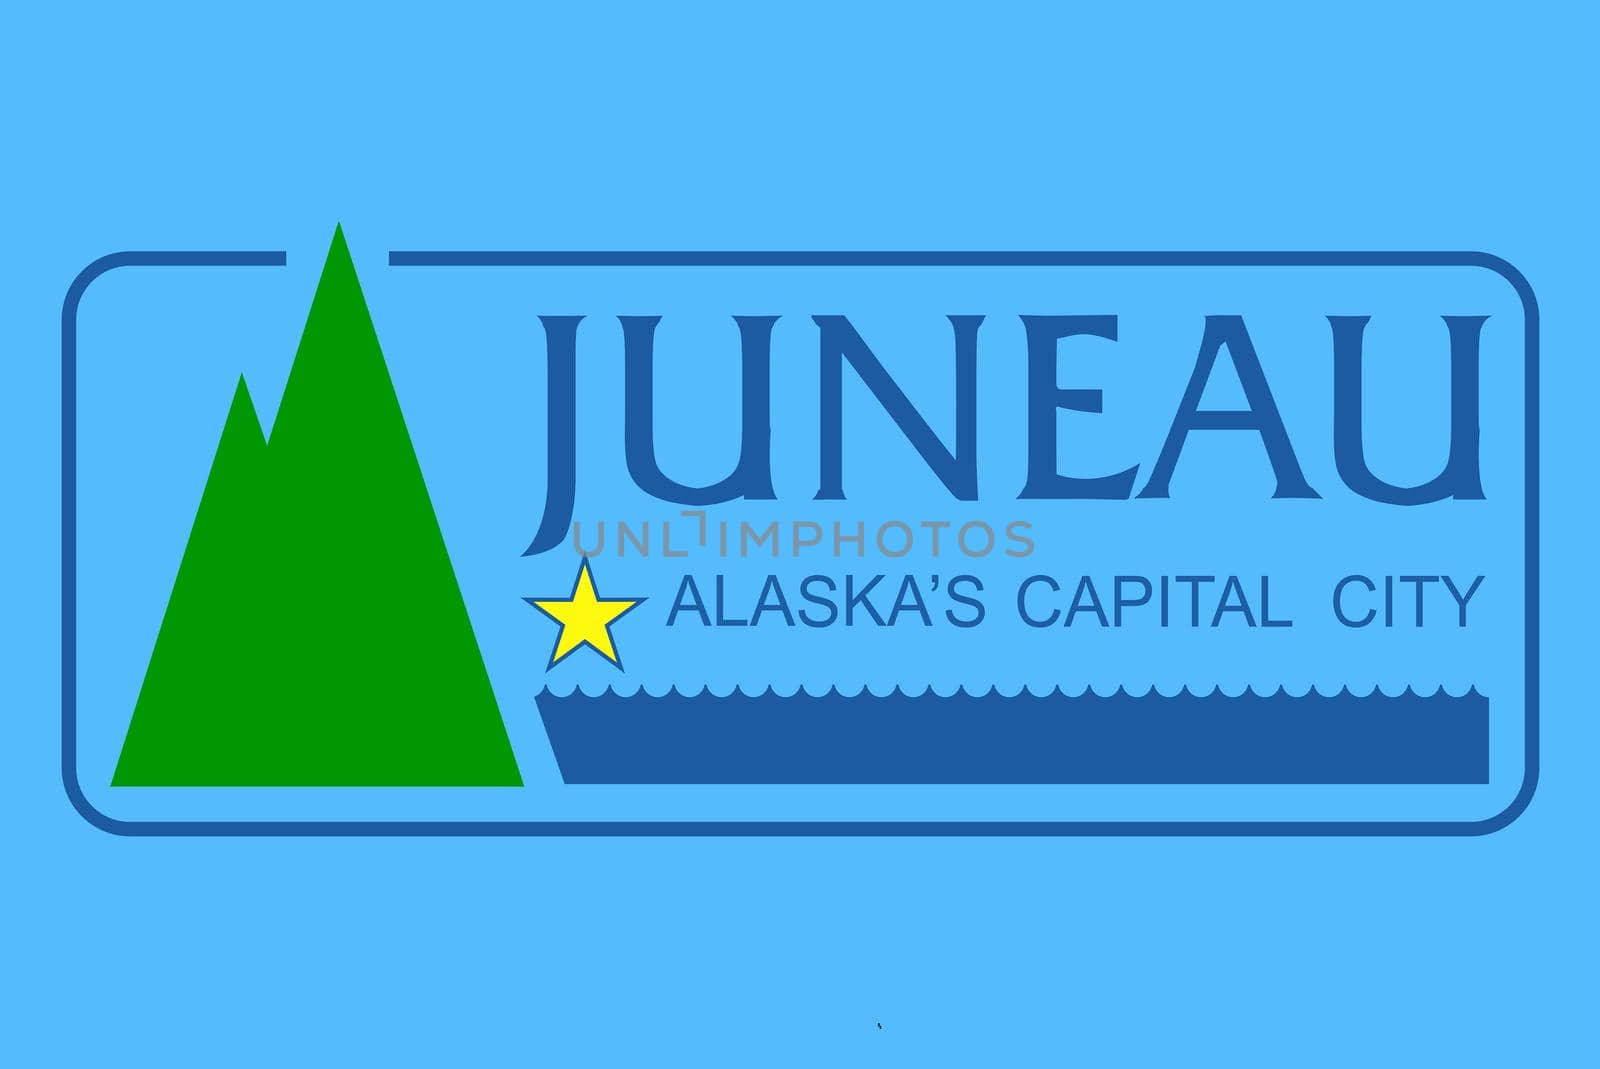 The traditional flag of the Alaska city of Juneau the Capital City